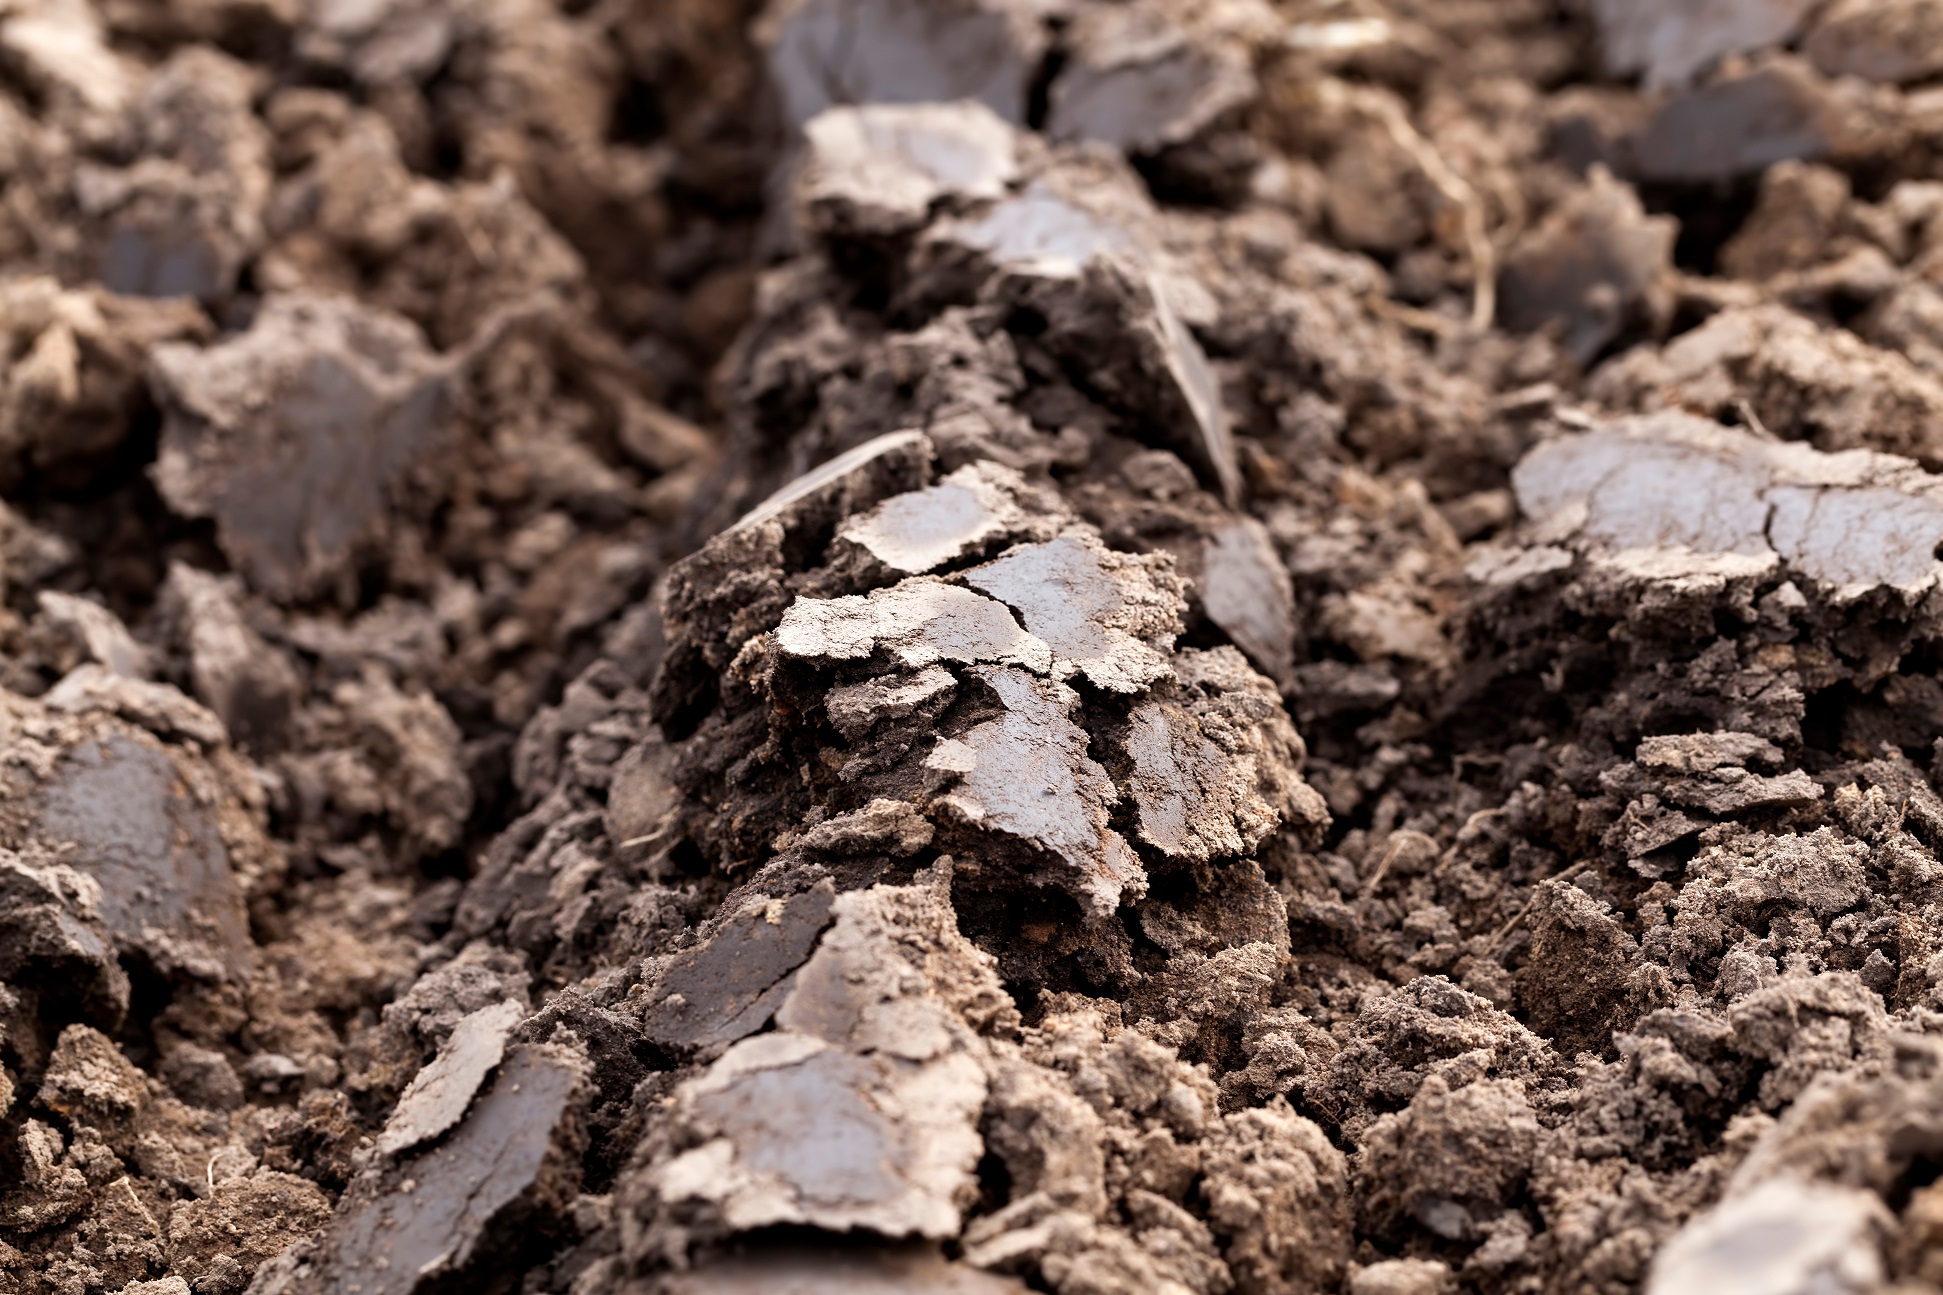 Understanding Clay Soil and How to Improve It